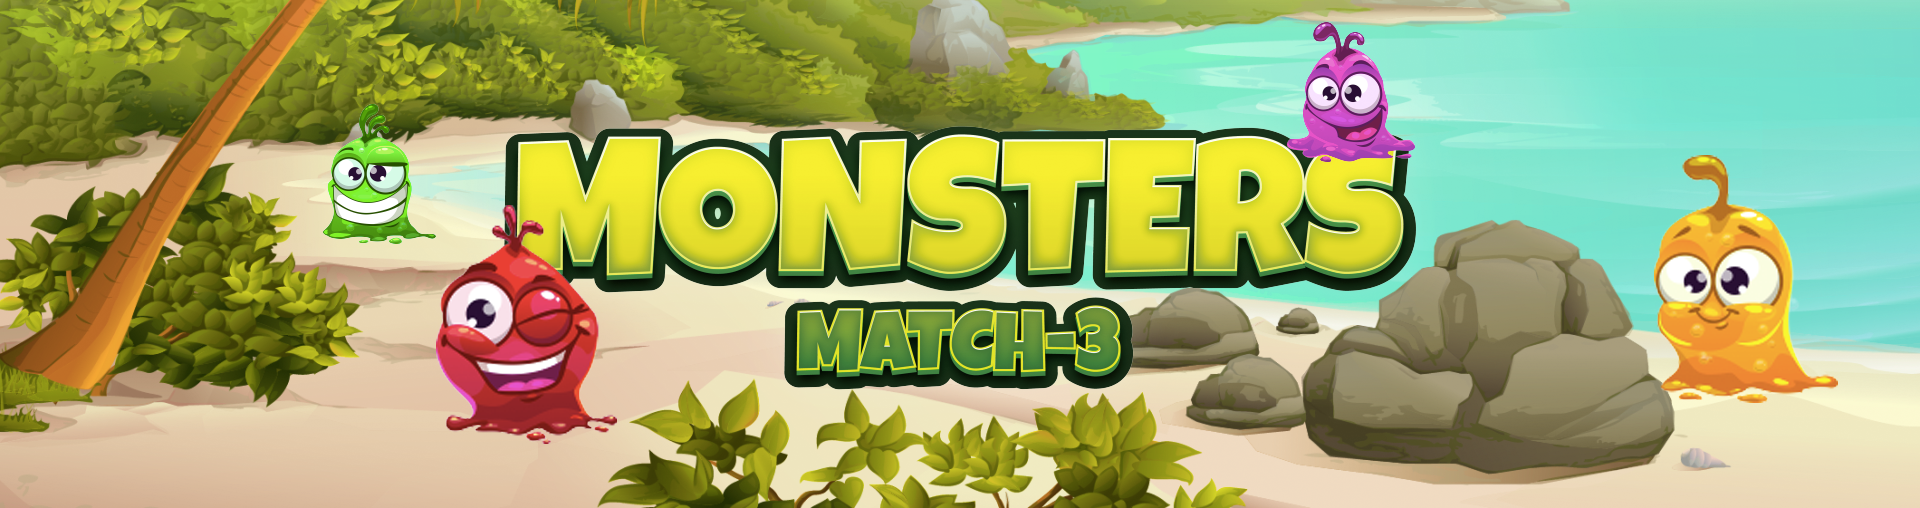 Monsters Match 3